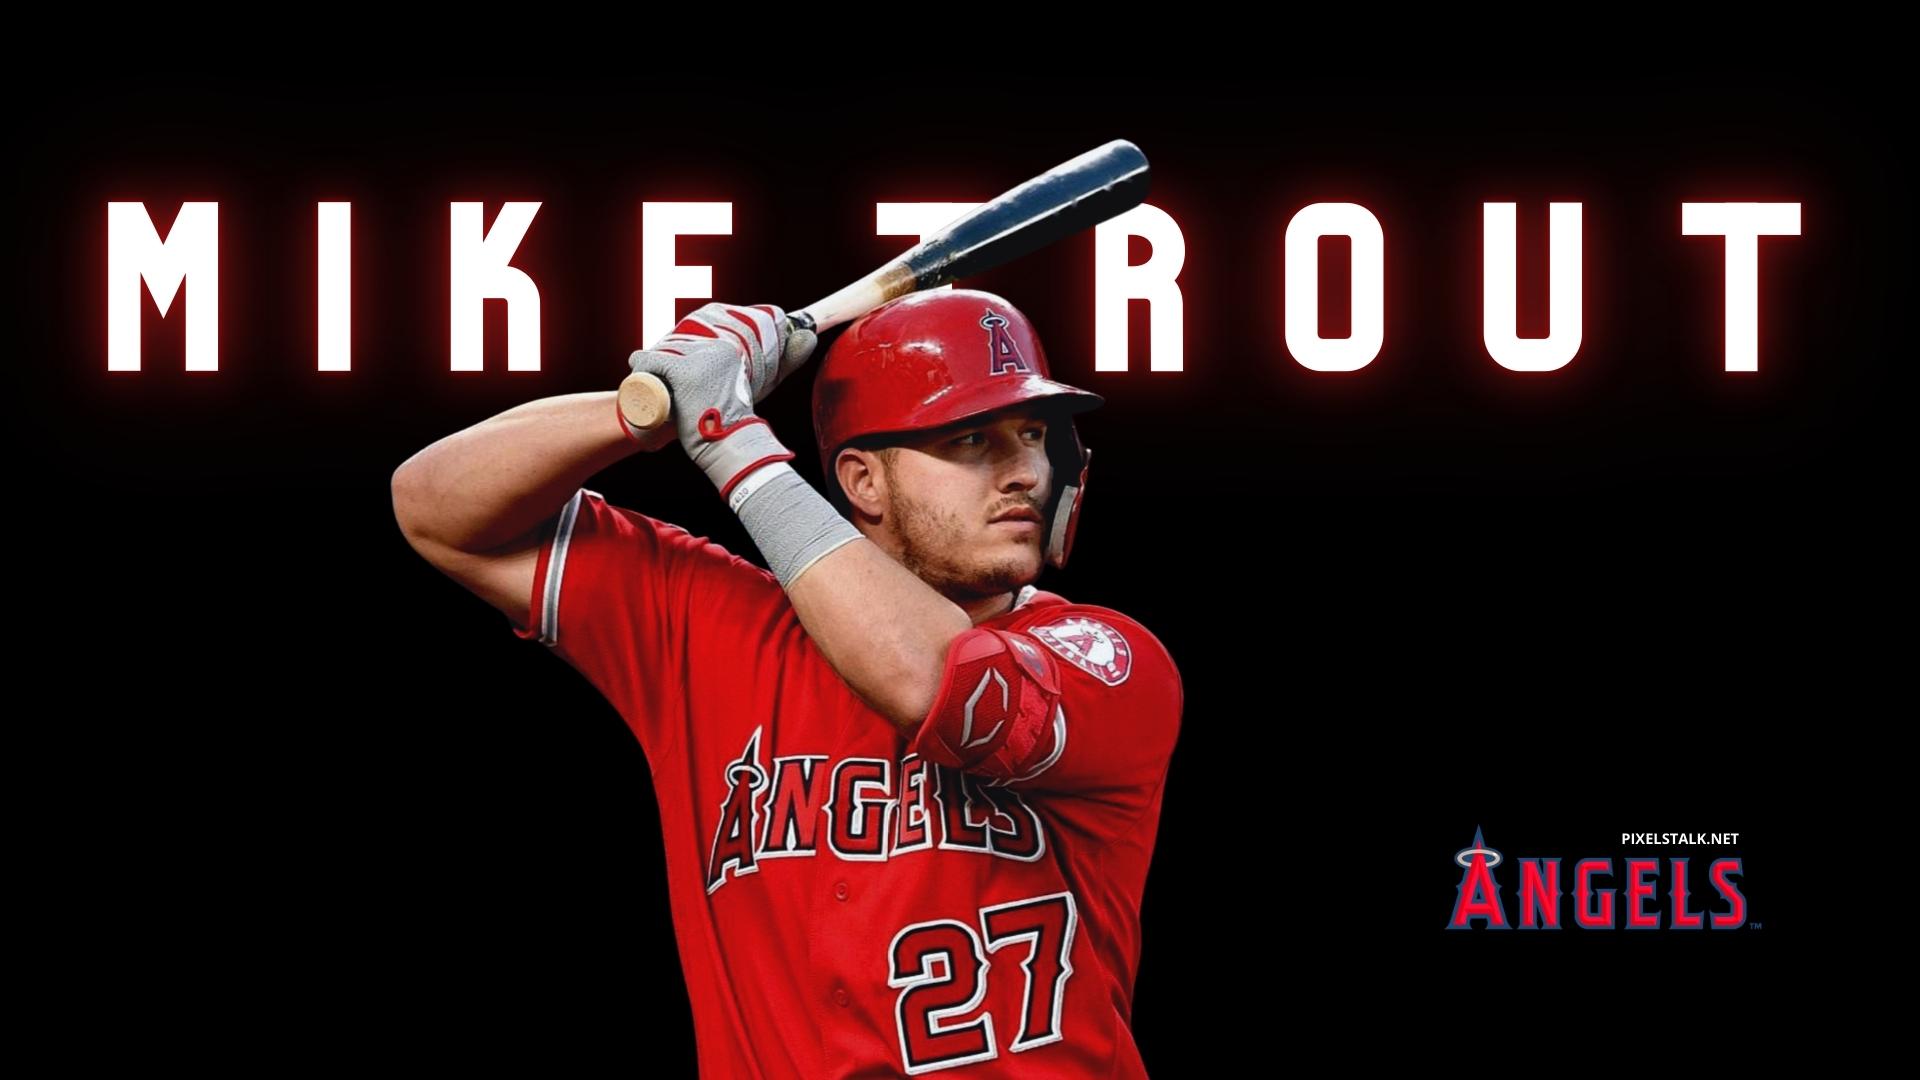 Download Mike Trout And His Team Wallpaper